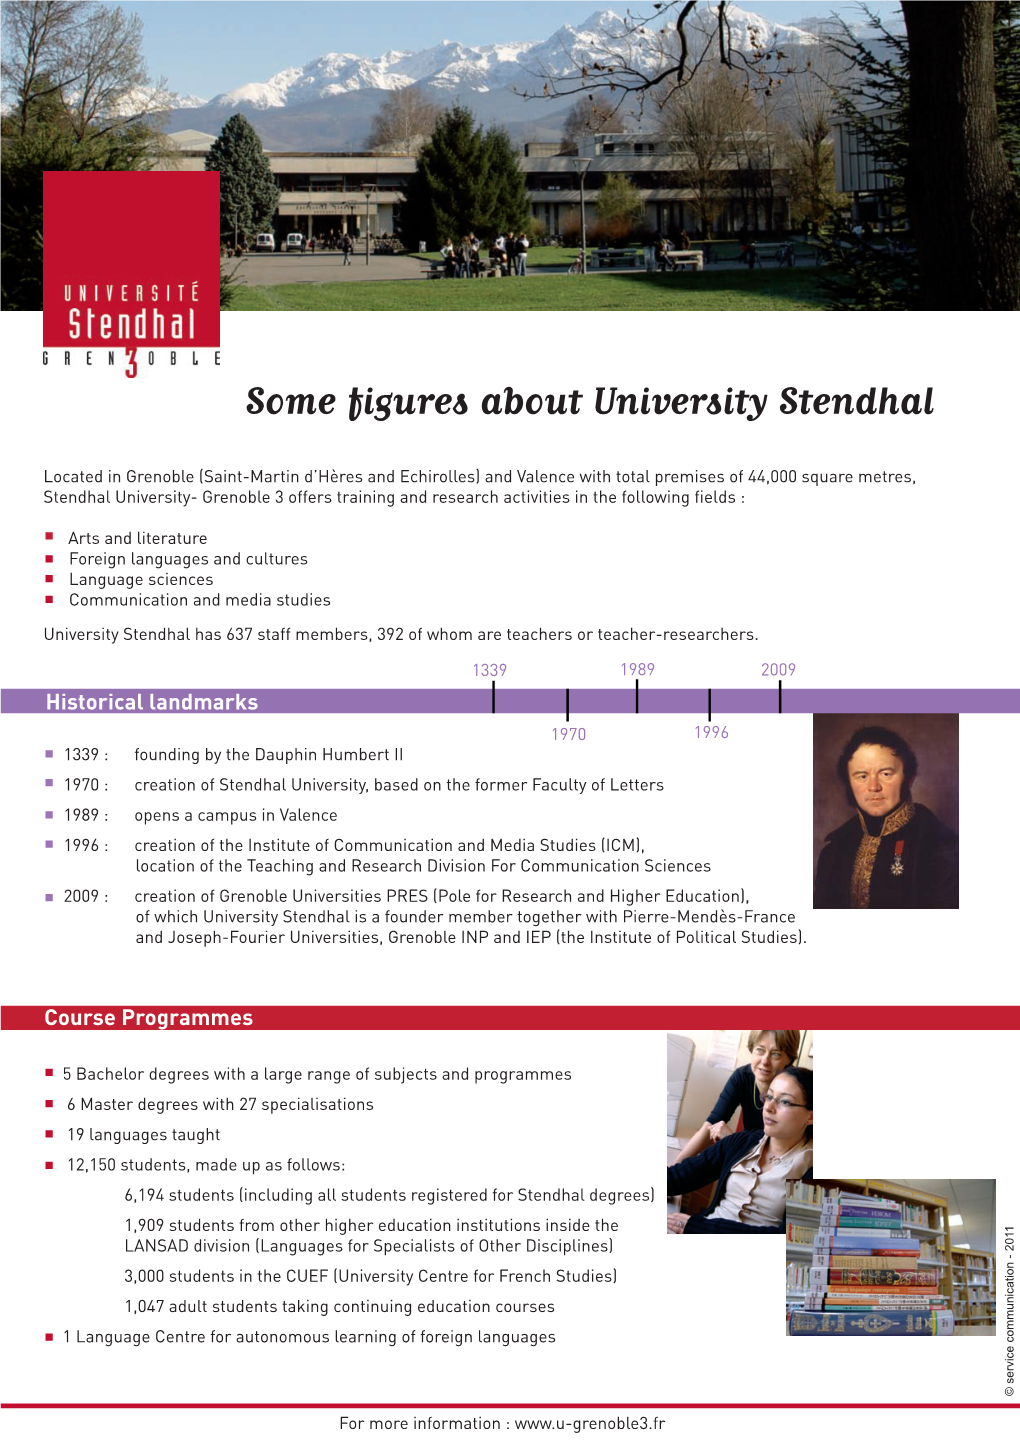 Some Figures About University Stendhal